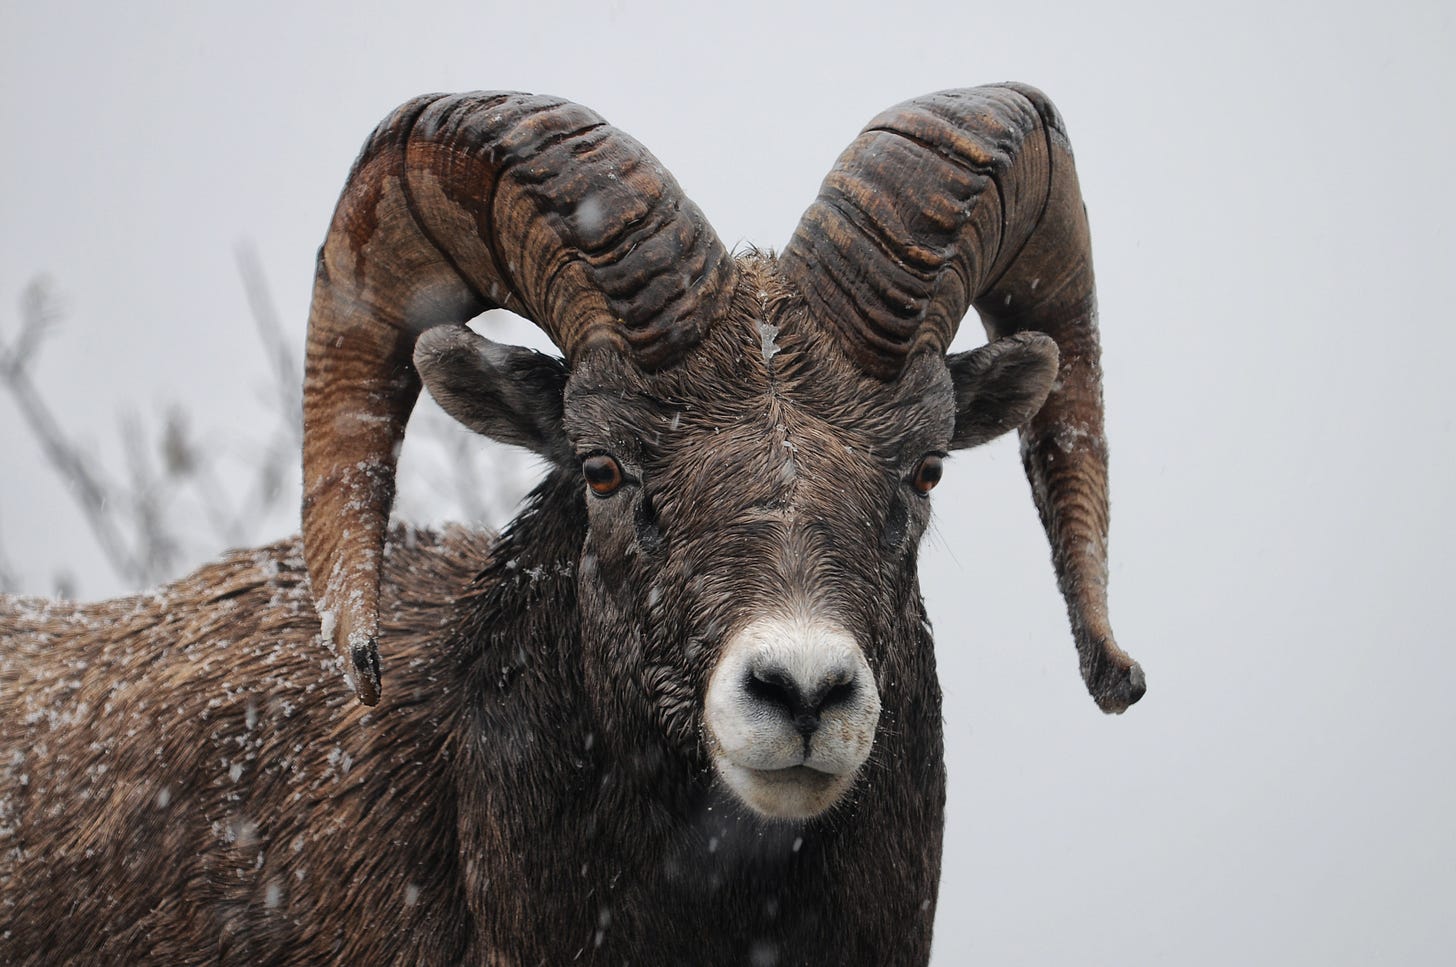 Via the photographer: A stone sheep glares at us in Canada’s Jasper National Park. His herd crossed the road right in front of our car, hopped the guardrail, and disappeared down into the forest through the wet falling snow.